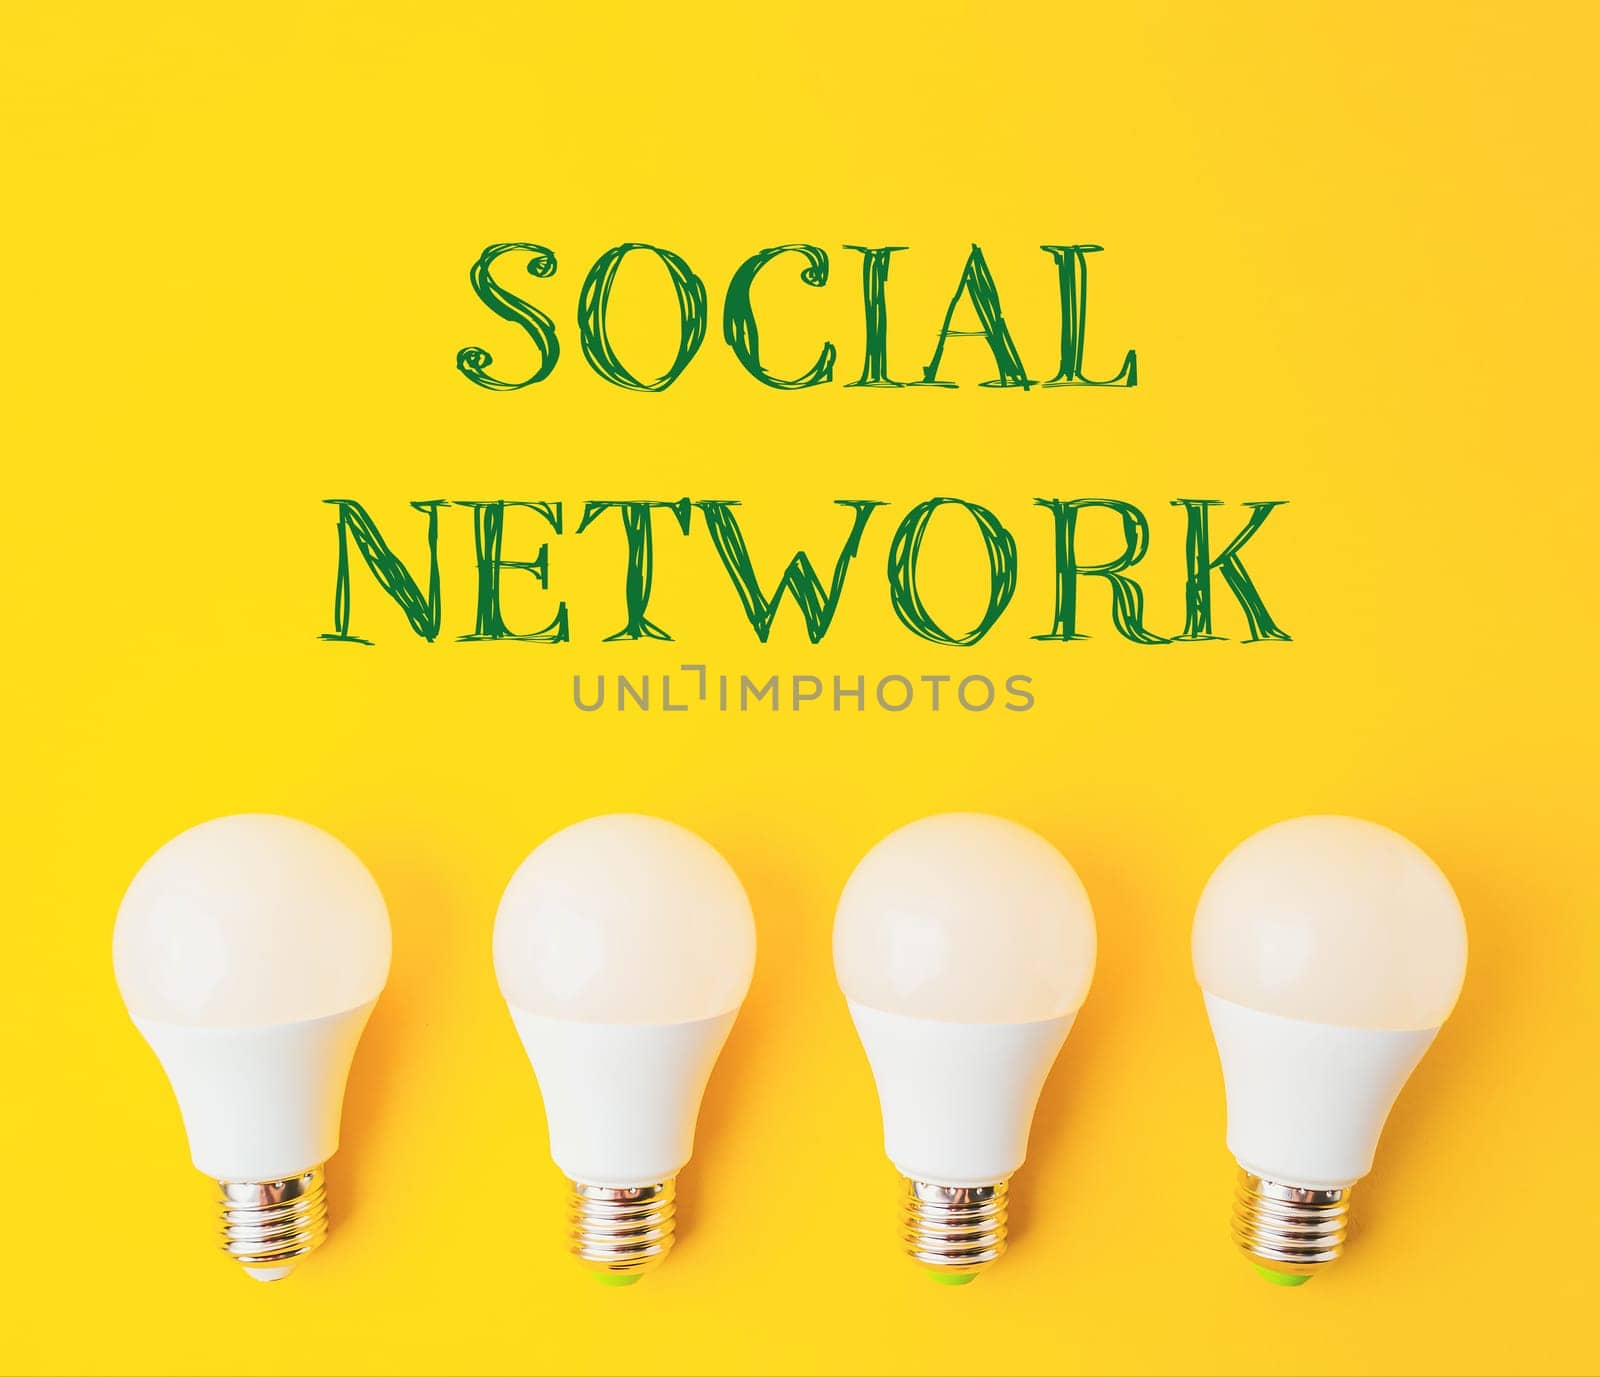 A group of four white light bulbs with the word social network written above them. Concept of unity and collaboration, as the bulbs are grouped together